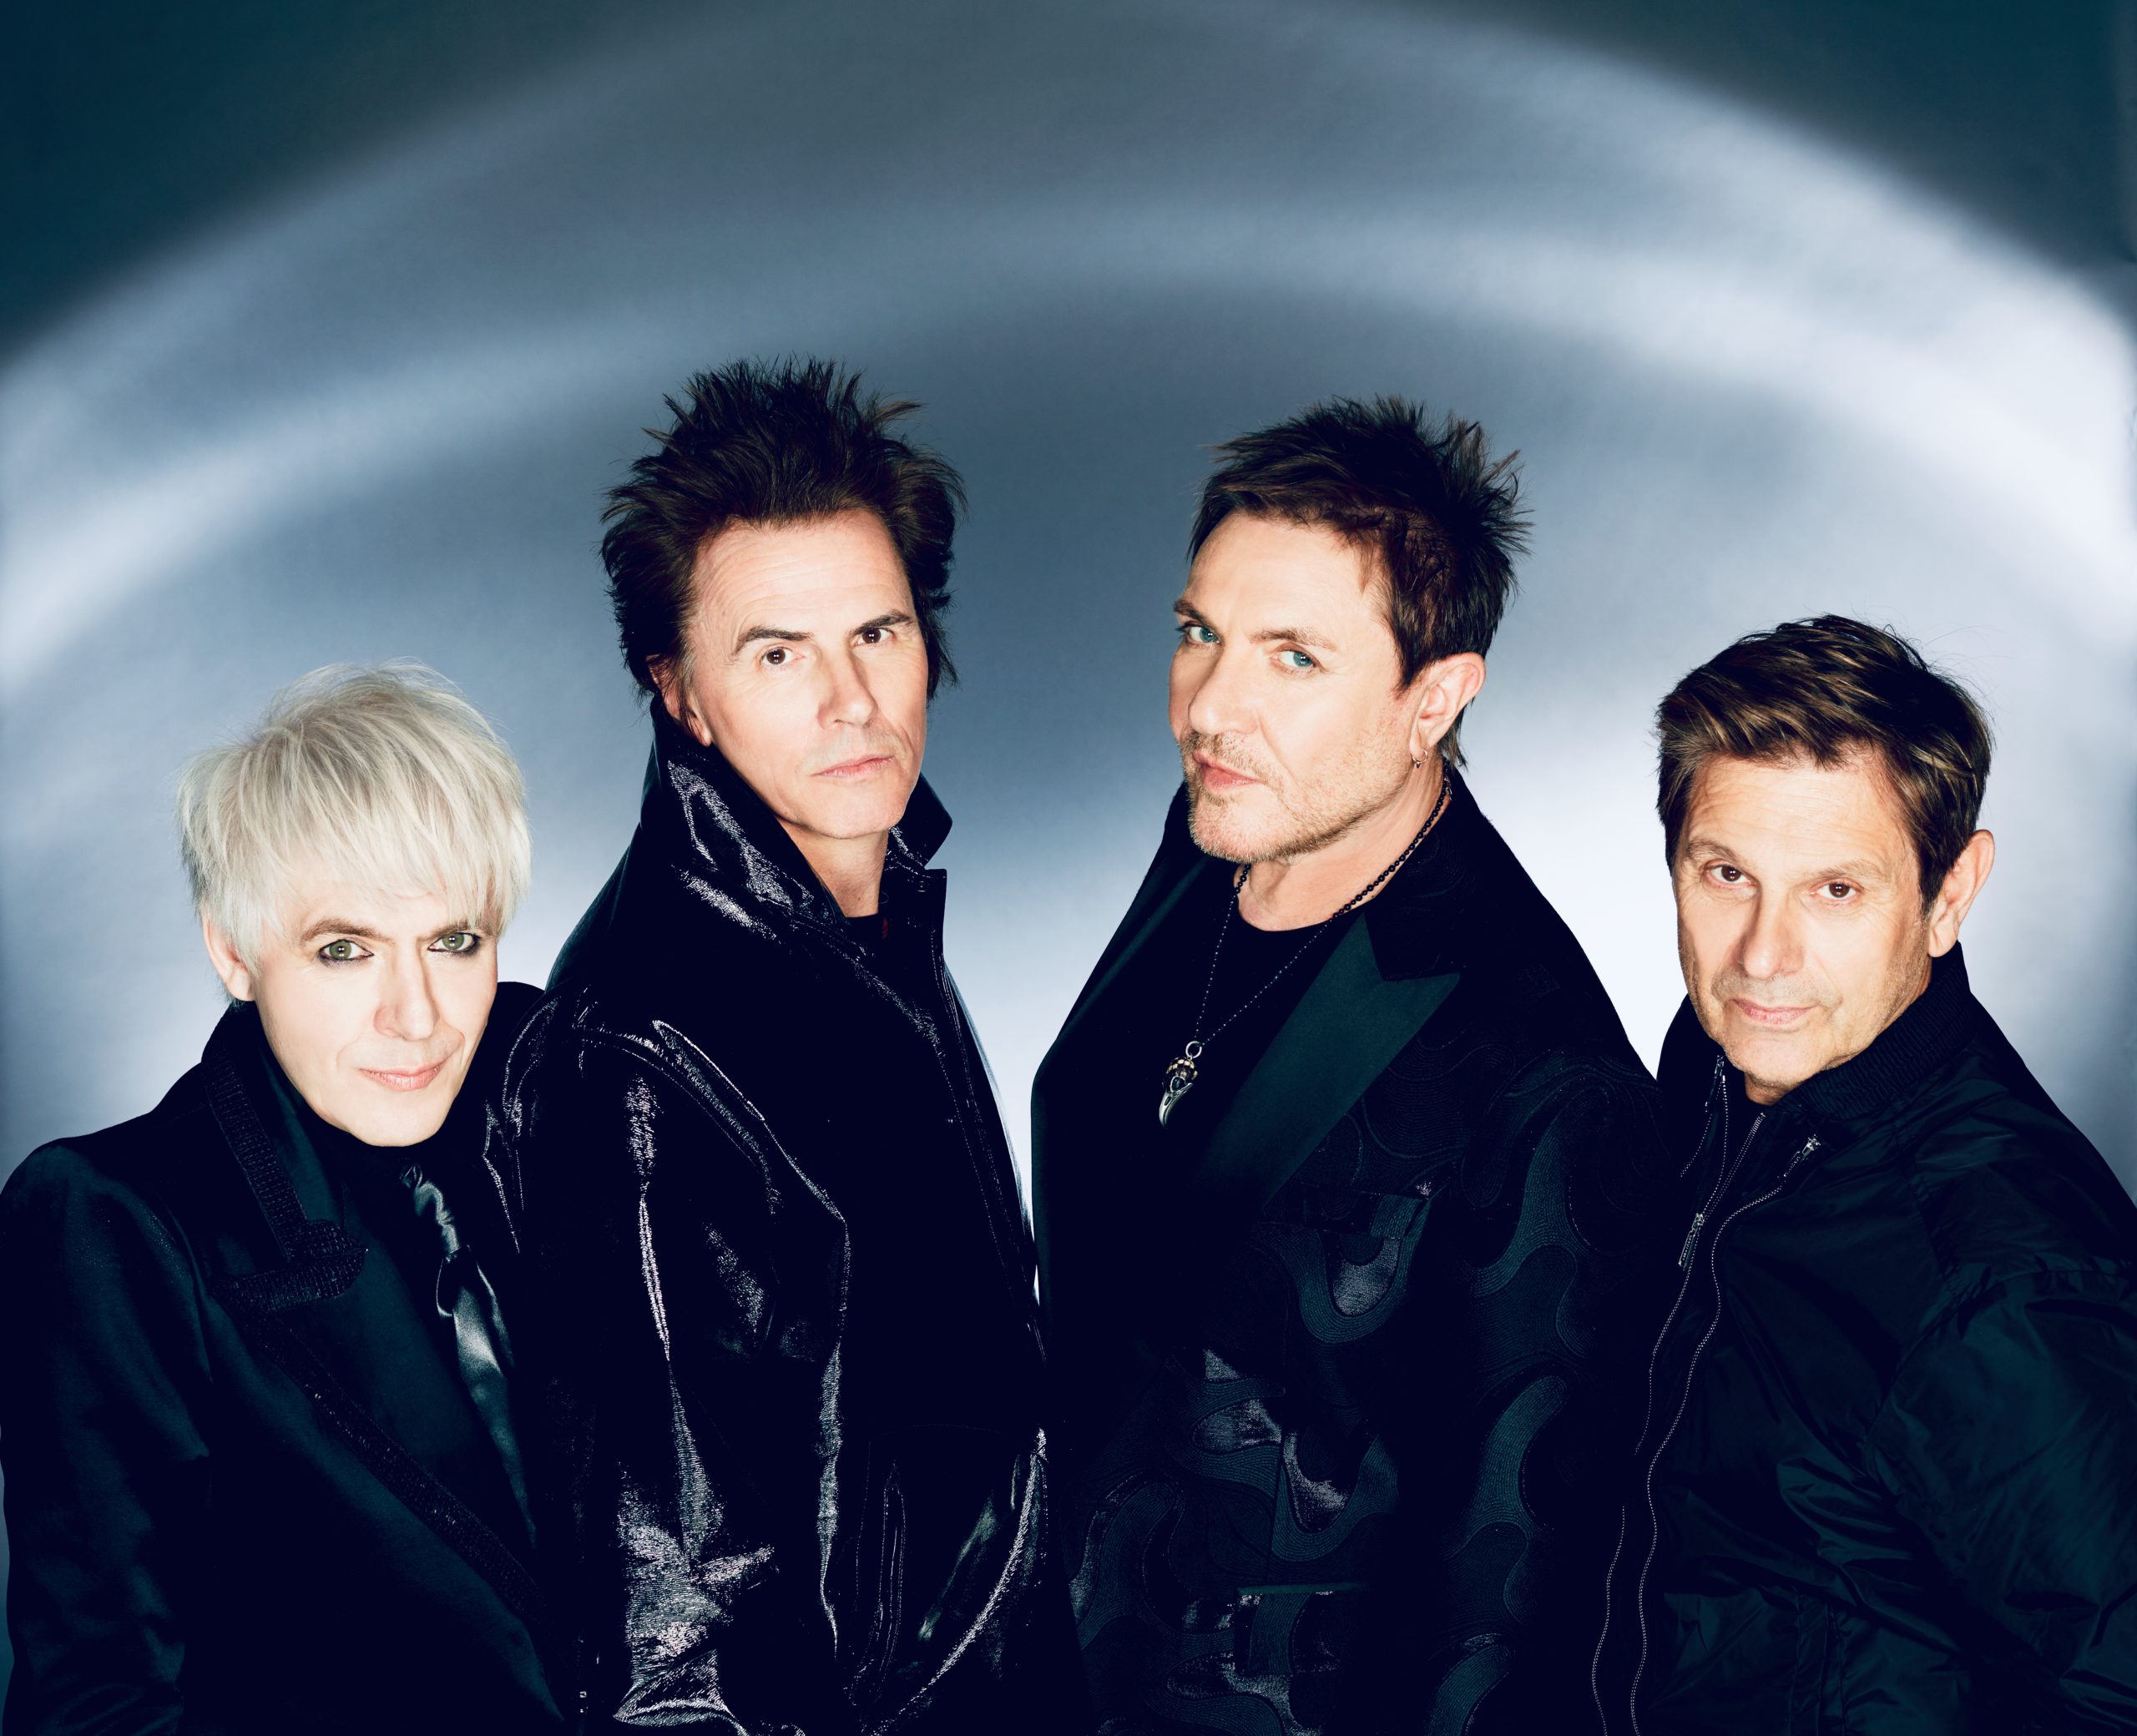 Duran Duran the legendary new wave band announced a US based late summer tour